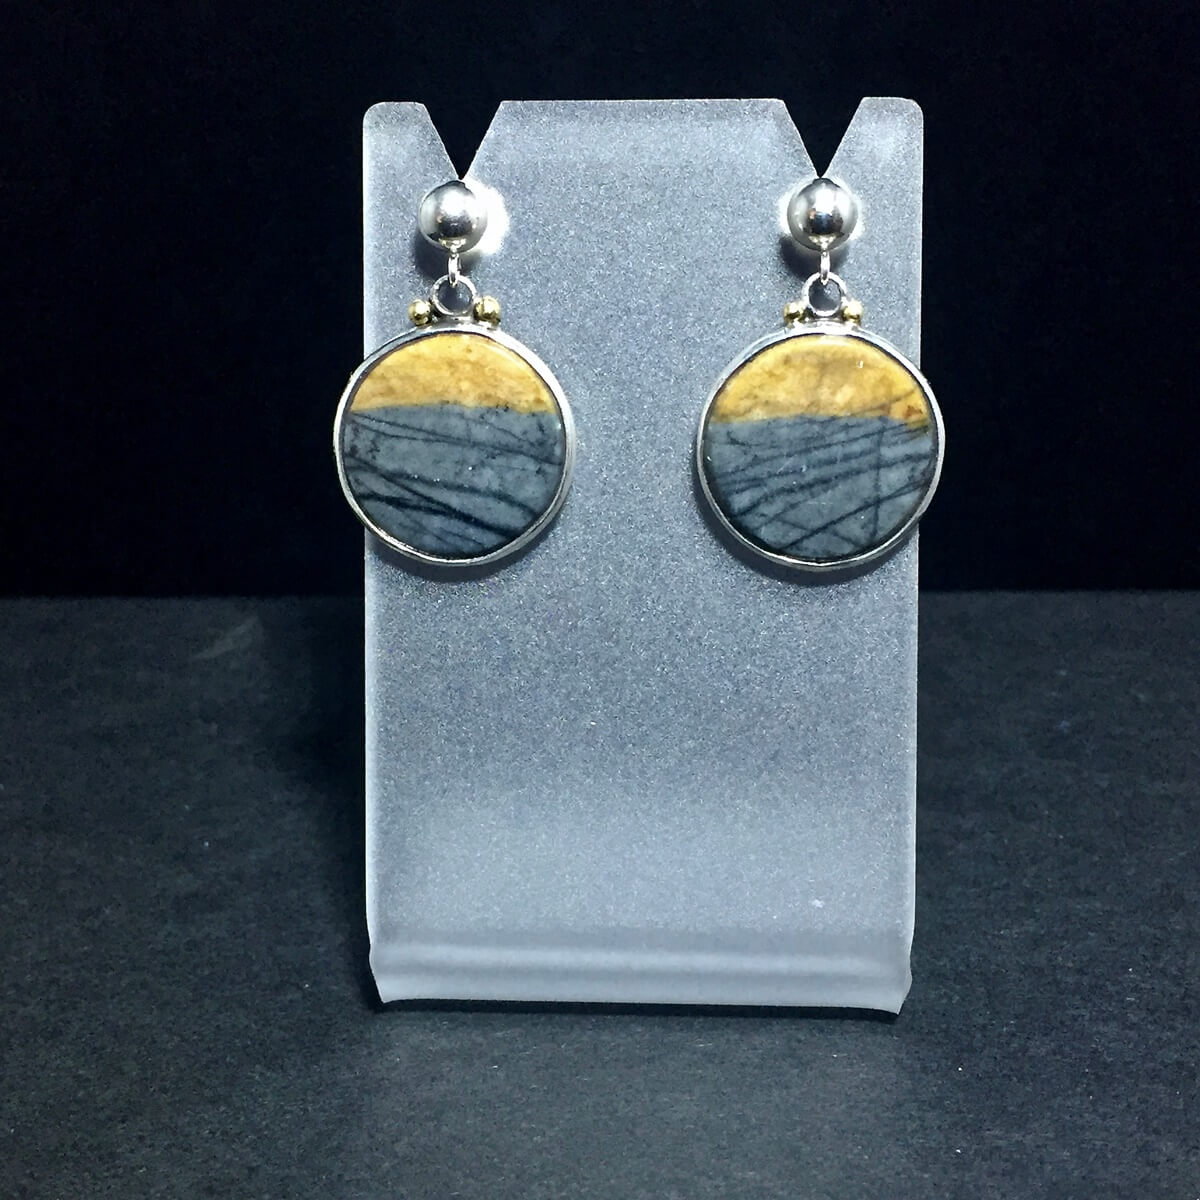 Utah Picasso Marble earrings, set in Sterling/Fine Silver/18K Gold.
Contact me to purchase.
https://dancing-raven-stoneworks-llc.square.site/contact-us